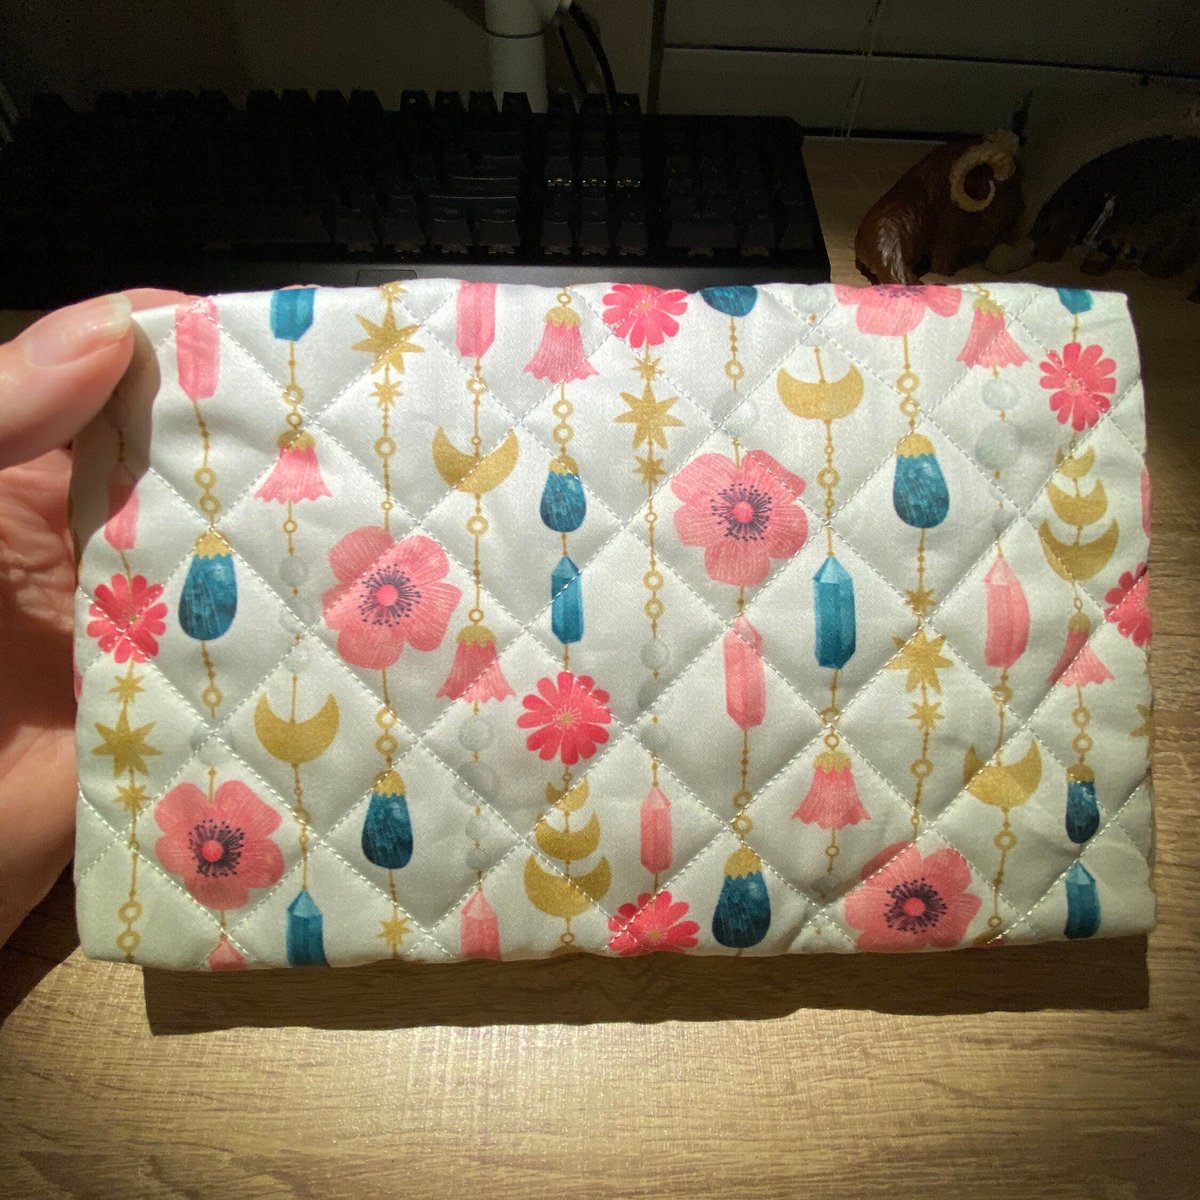 Excited to share the latest addition to my #etsy shop: Continuous Floral Moon Quilted Make Up Bag Bridesmaid Gift etsy.me/3GsgH1f #pink #yellow #floral #zipperbag #madetoorder #celestial #bridesmaidgift #makeupbag #quiltedbag